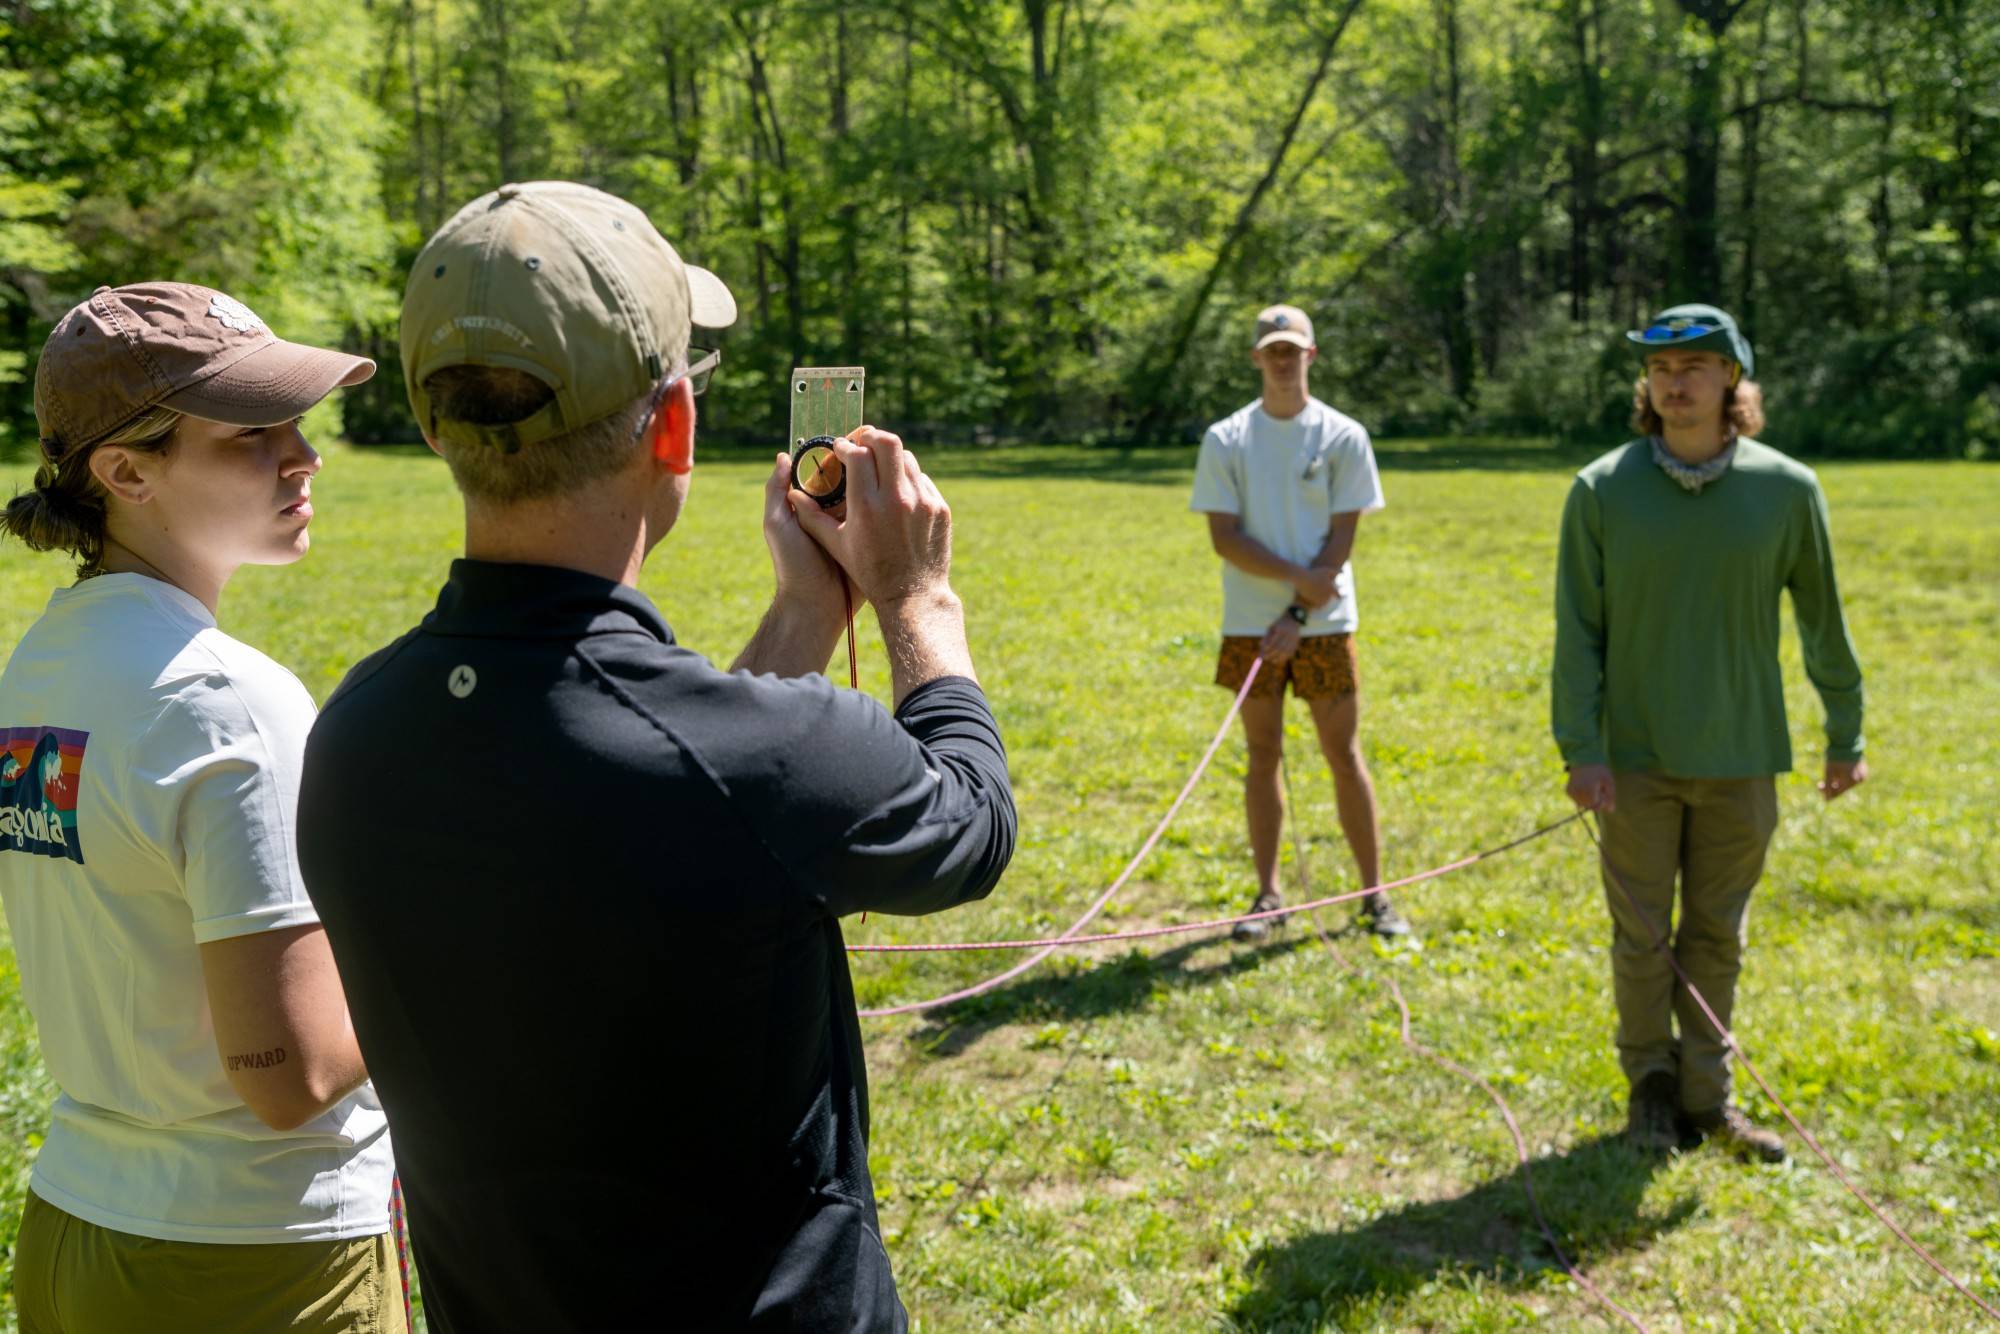 Associate Professor Andy Szolosi teaches students how to adjust their compasses for magnetic declination using climbing ropes as visual aides.